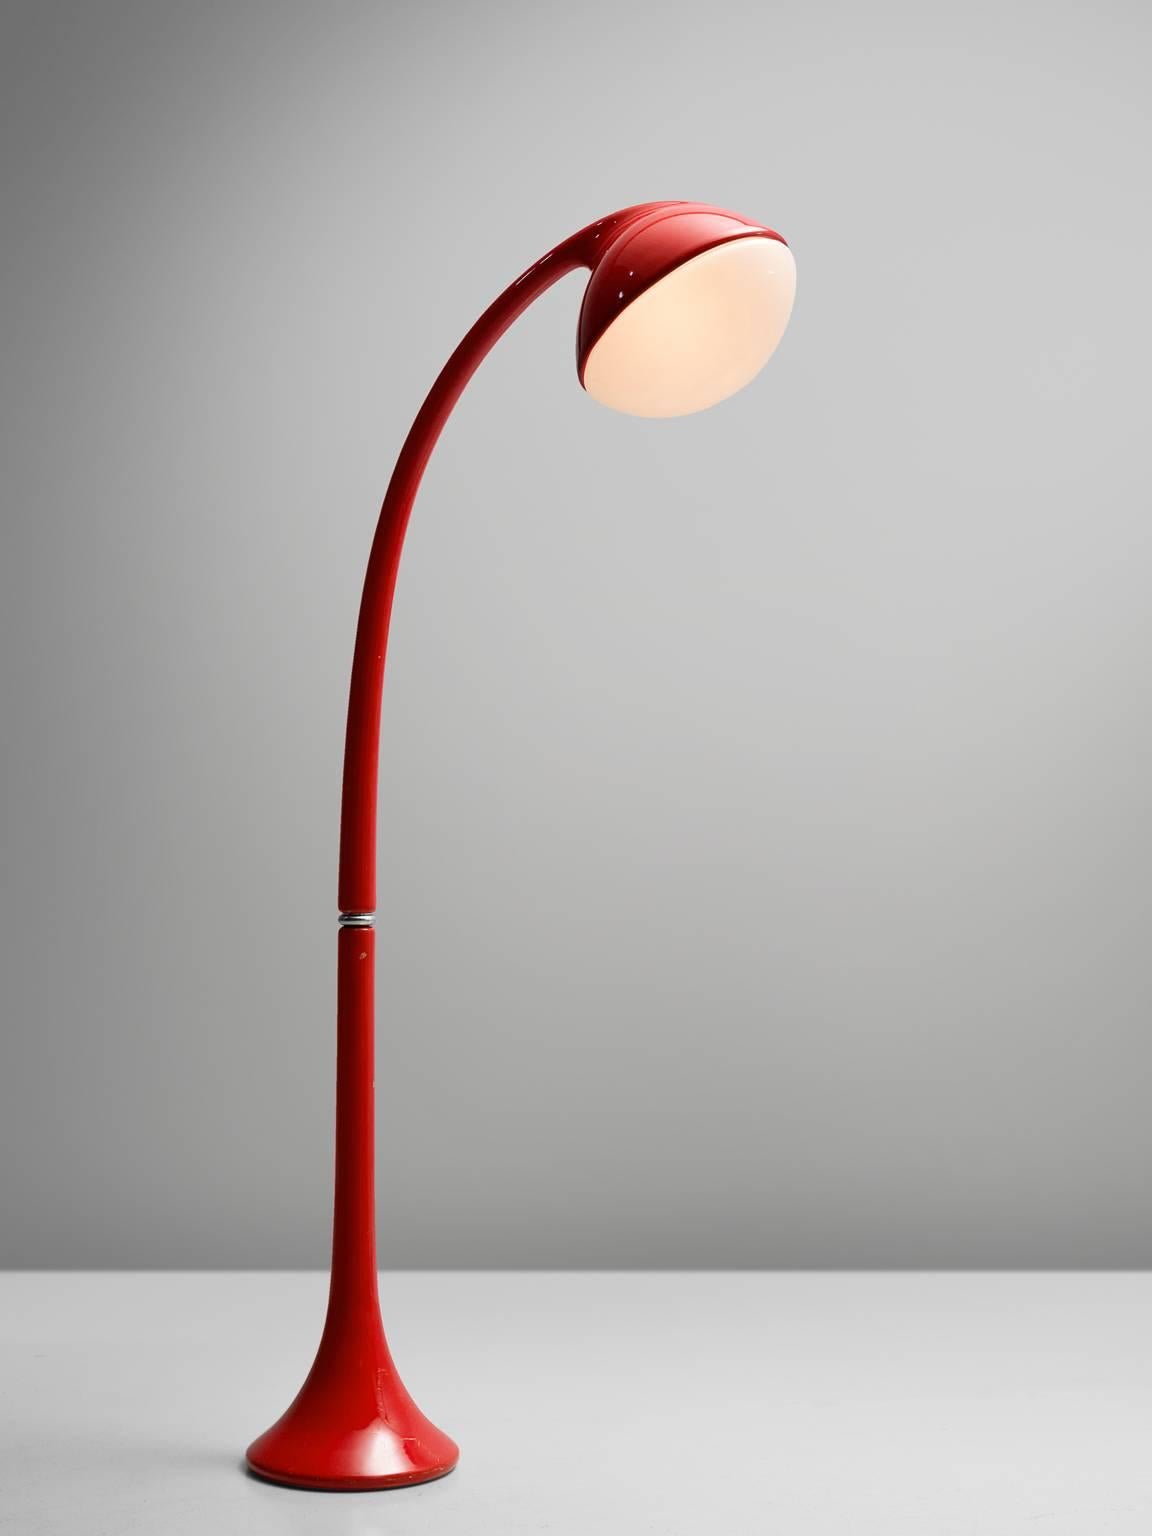 Fabio Lenci for Guzzini, floor lamp 'Lampione', steel and Lucite, by  Italy, 1971.

A bright red edition of 'Lampione' floor lamp by Fabio Lenci for Guzzini. A sculptural shaped steel frame, coated with polyurethane coating and a frosted Lucite